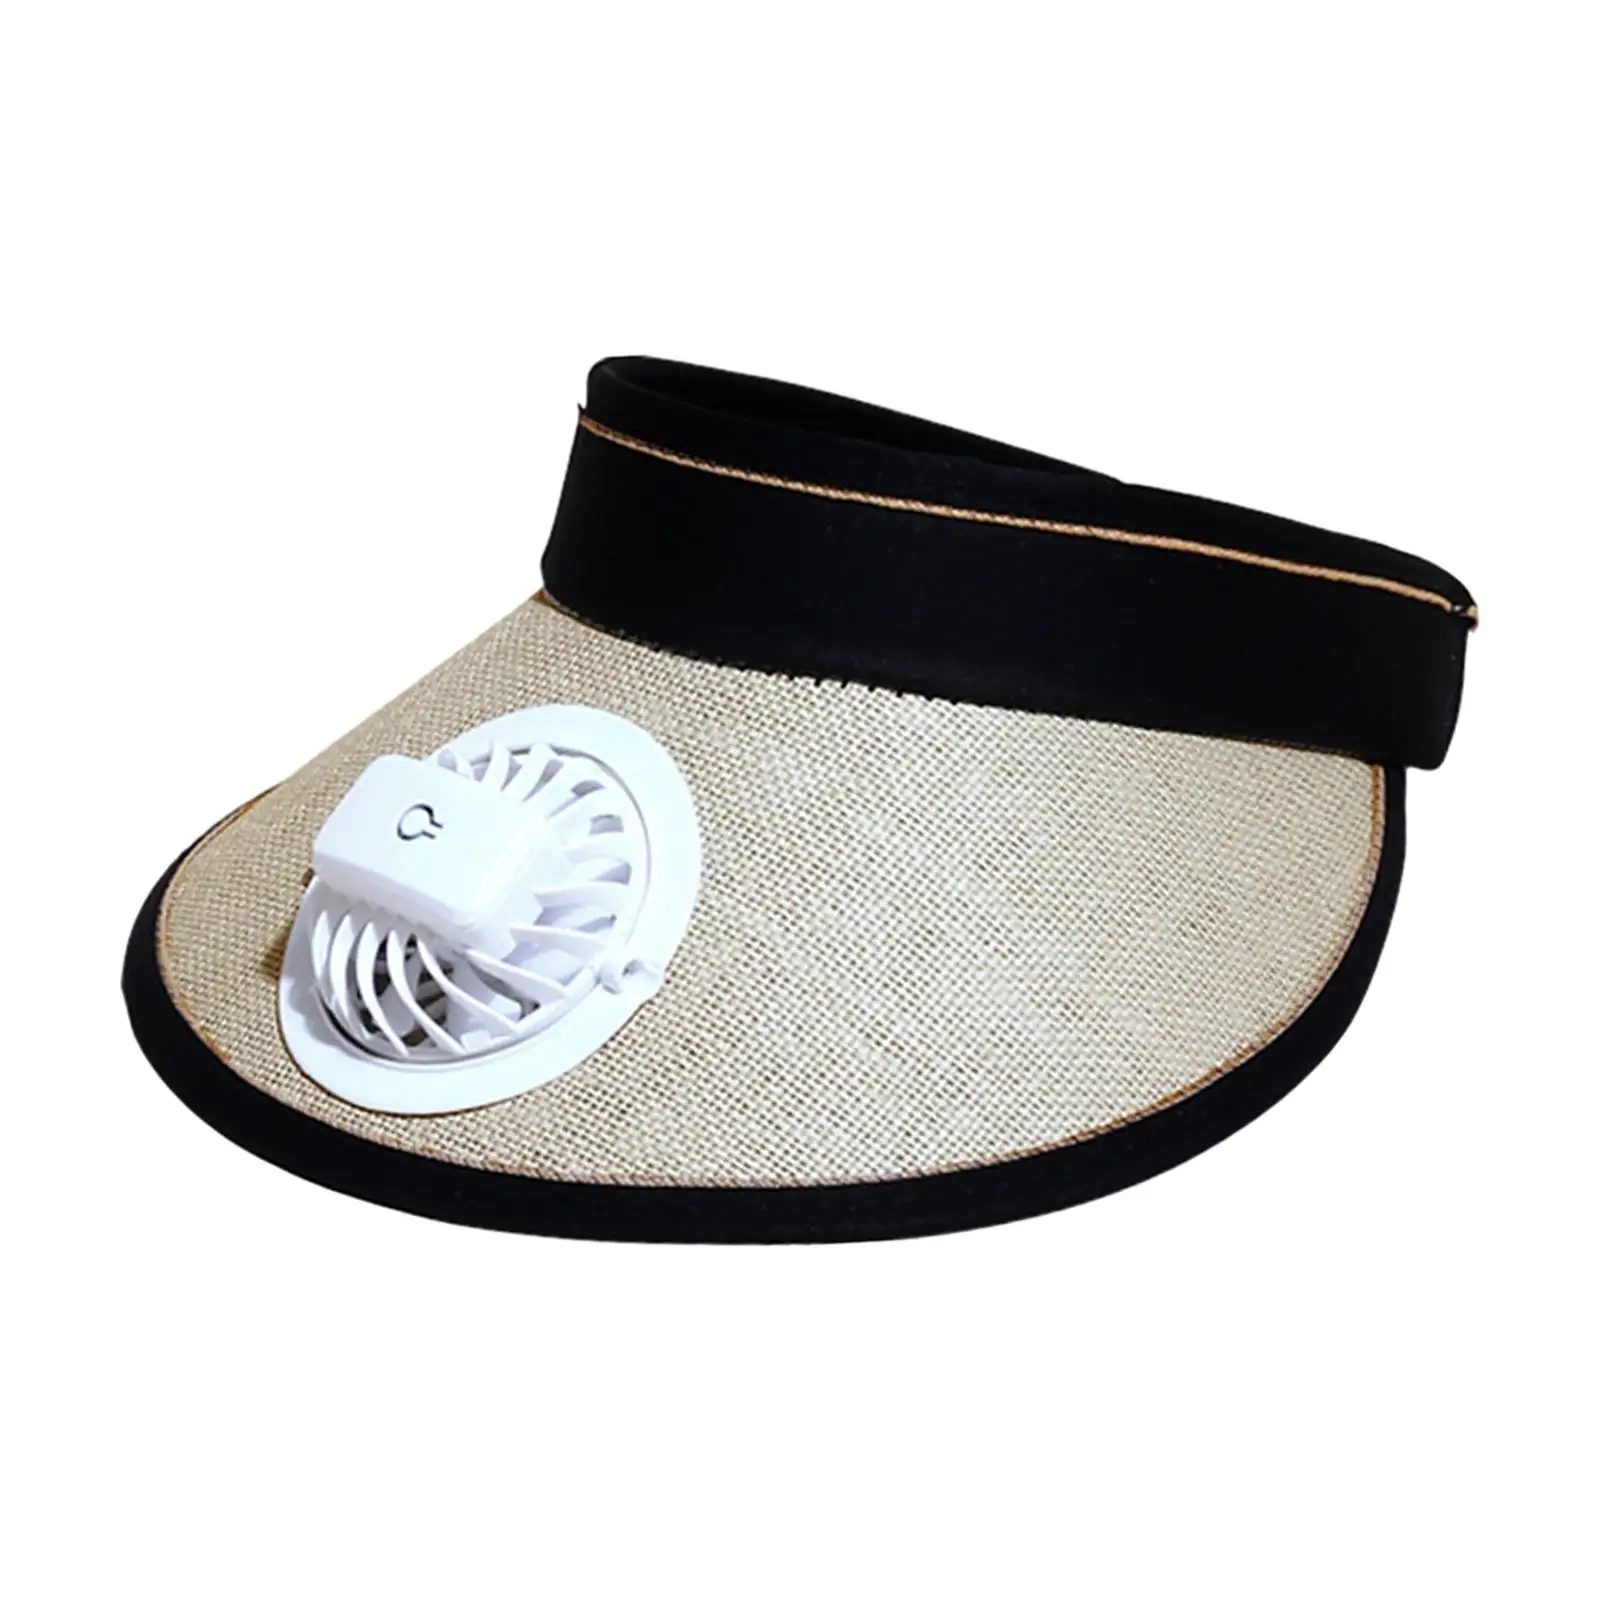 Beach Hat Sunshade Cap with Fan Large Brim Comfortable Three Adjustable Speeds Multifunctional Fashionable for UV Protection